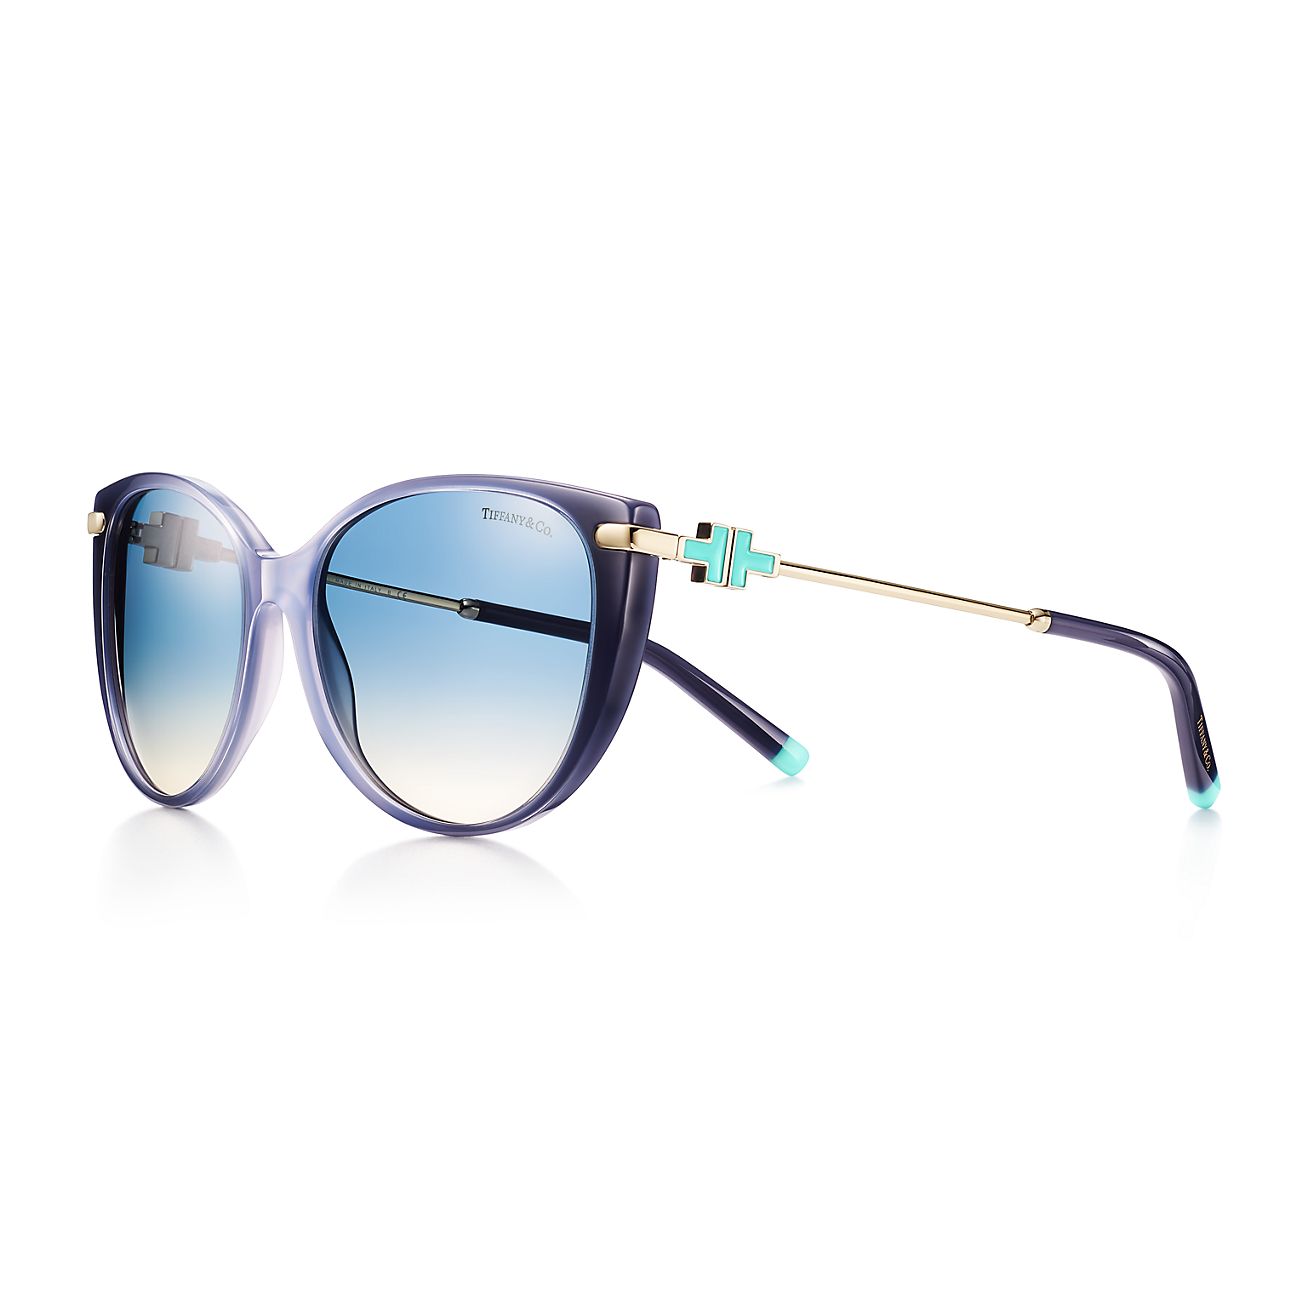 Tiffany T Cat Eye Sunglasses in Light Blue Acetate with Tiffany